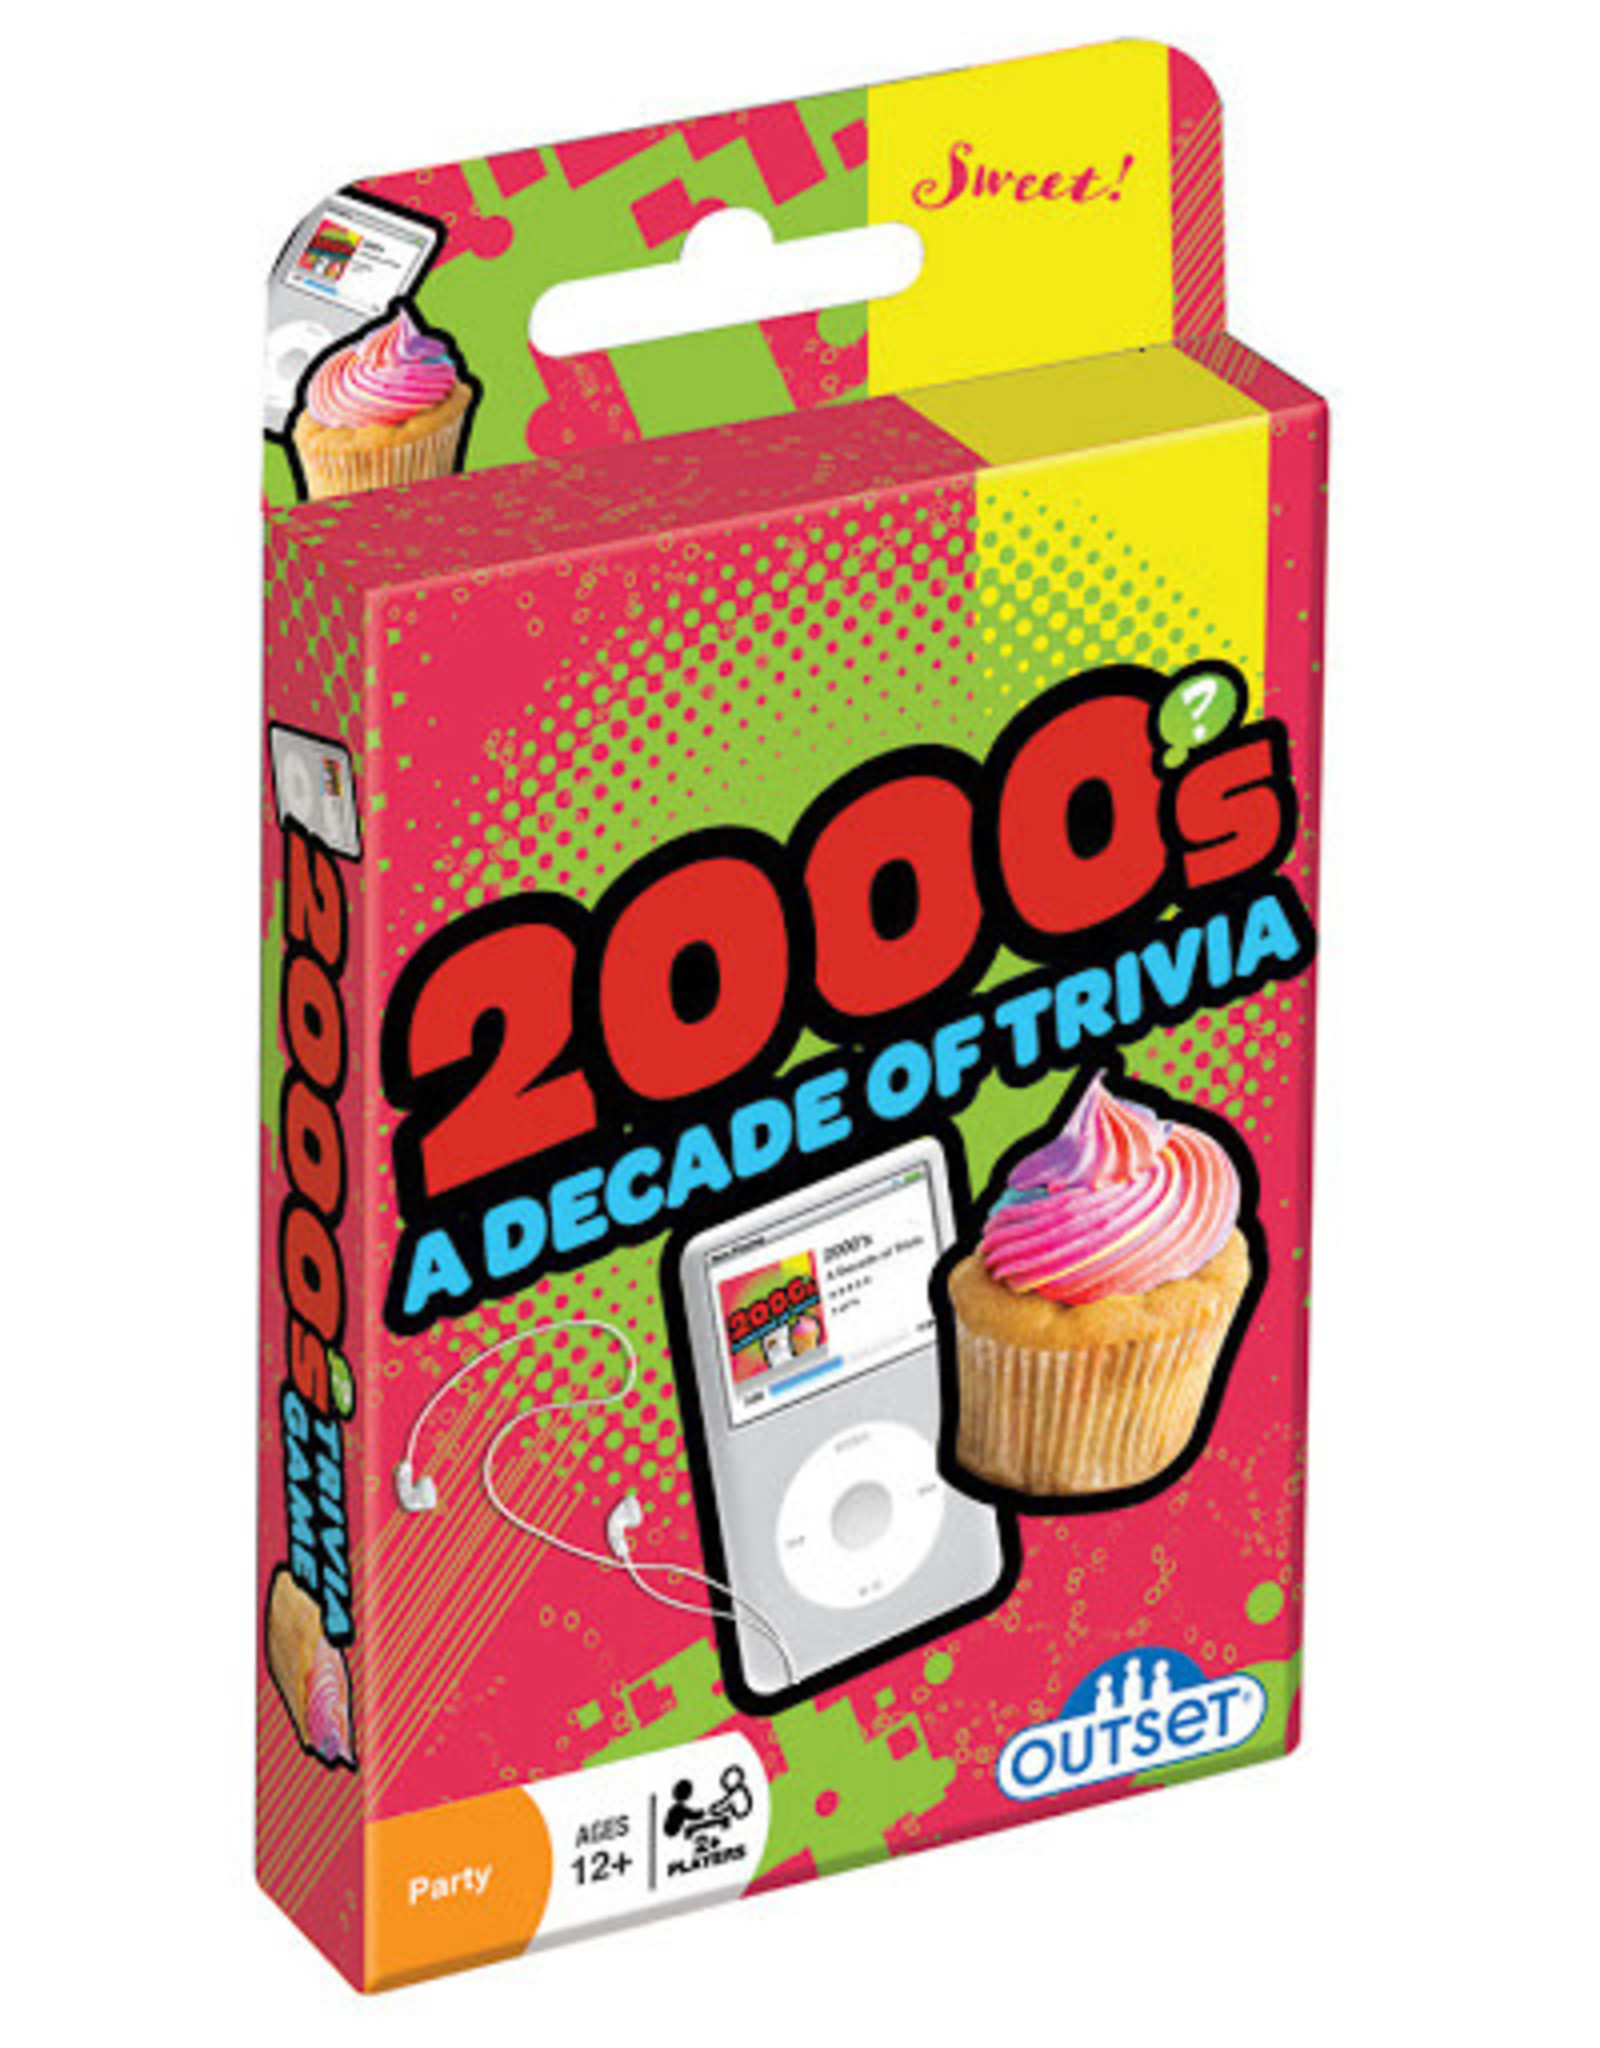 Outset Media 2000s Decade of Trivia